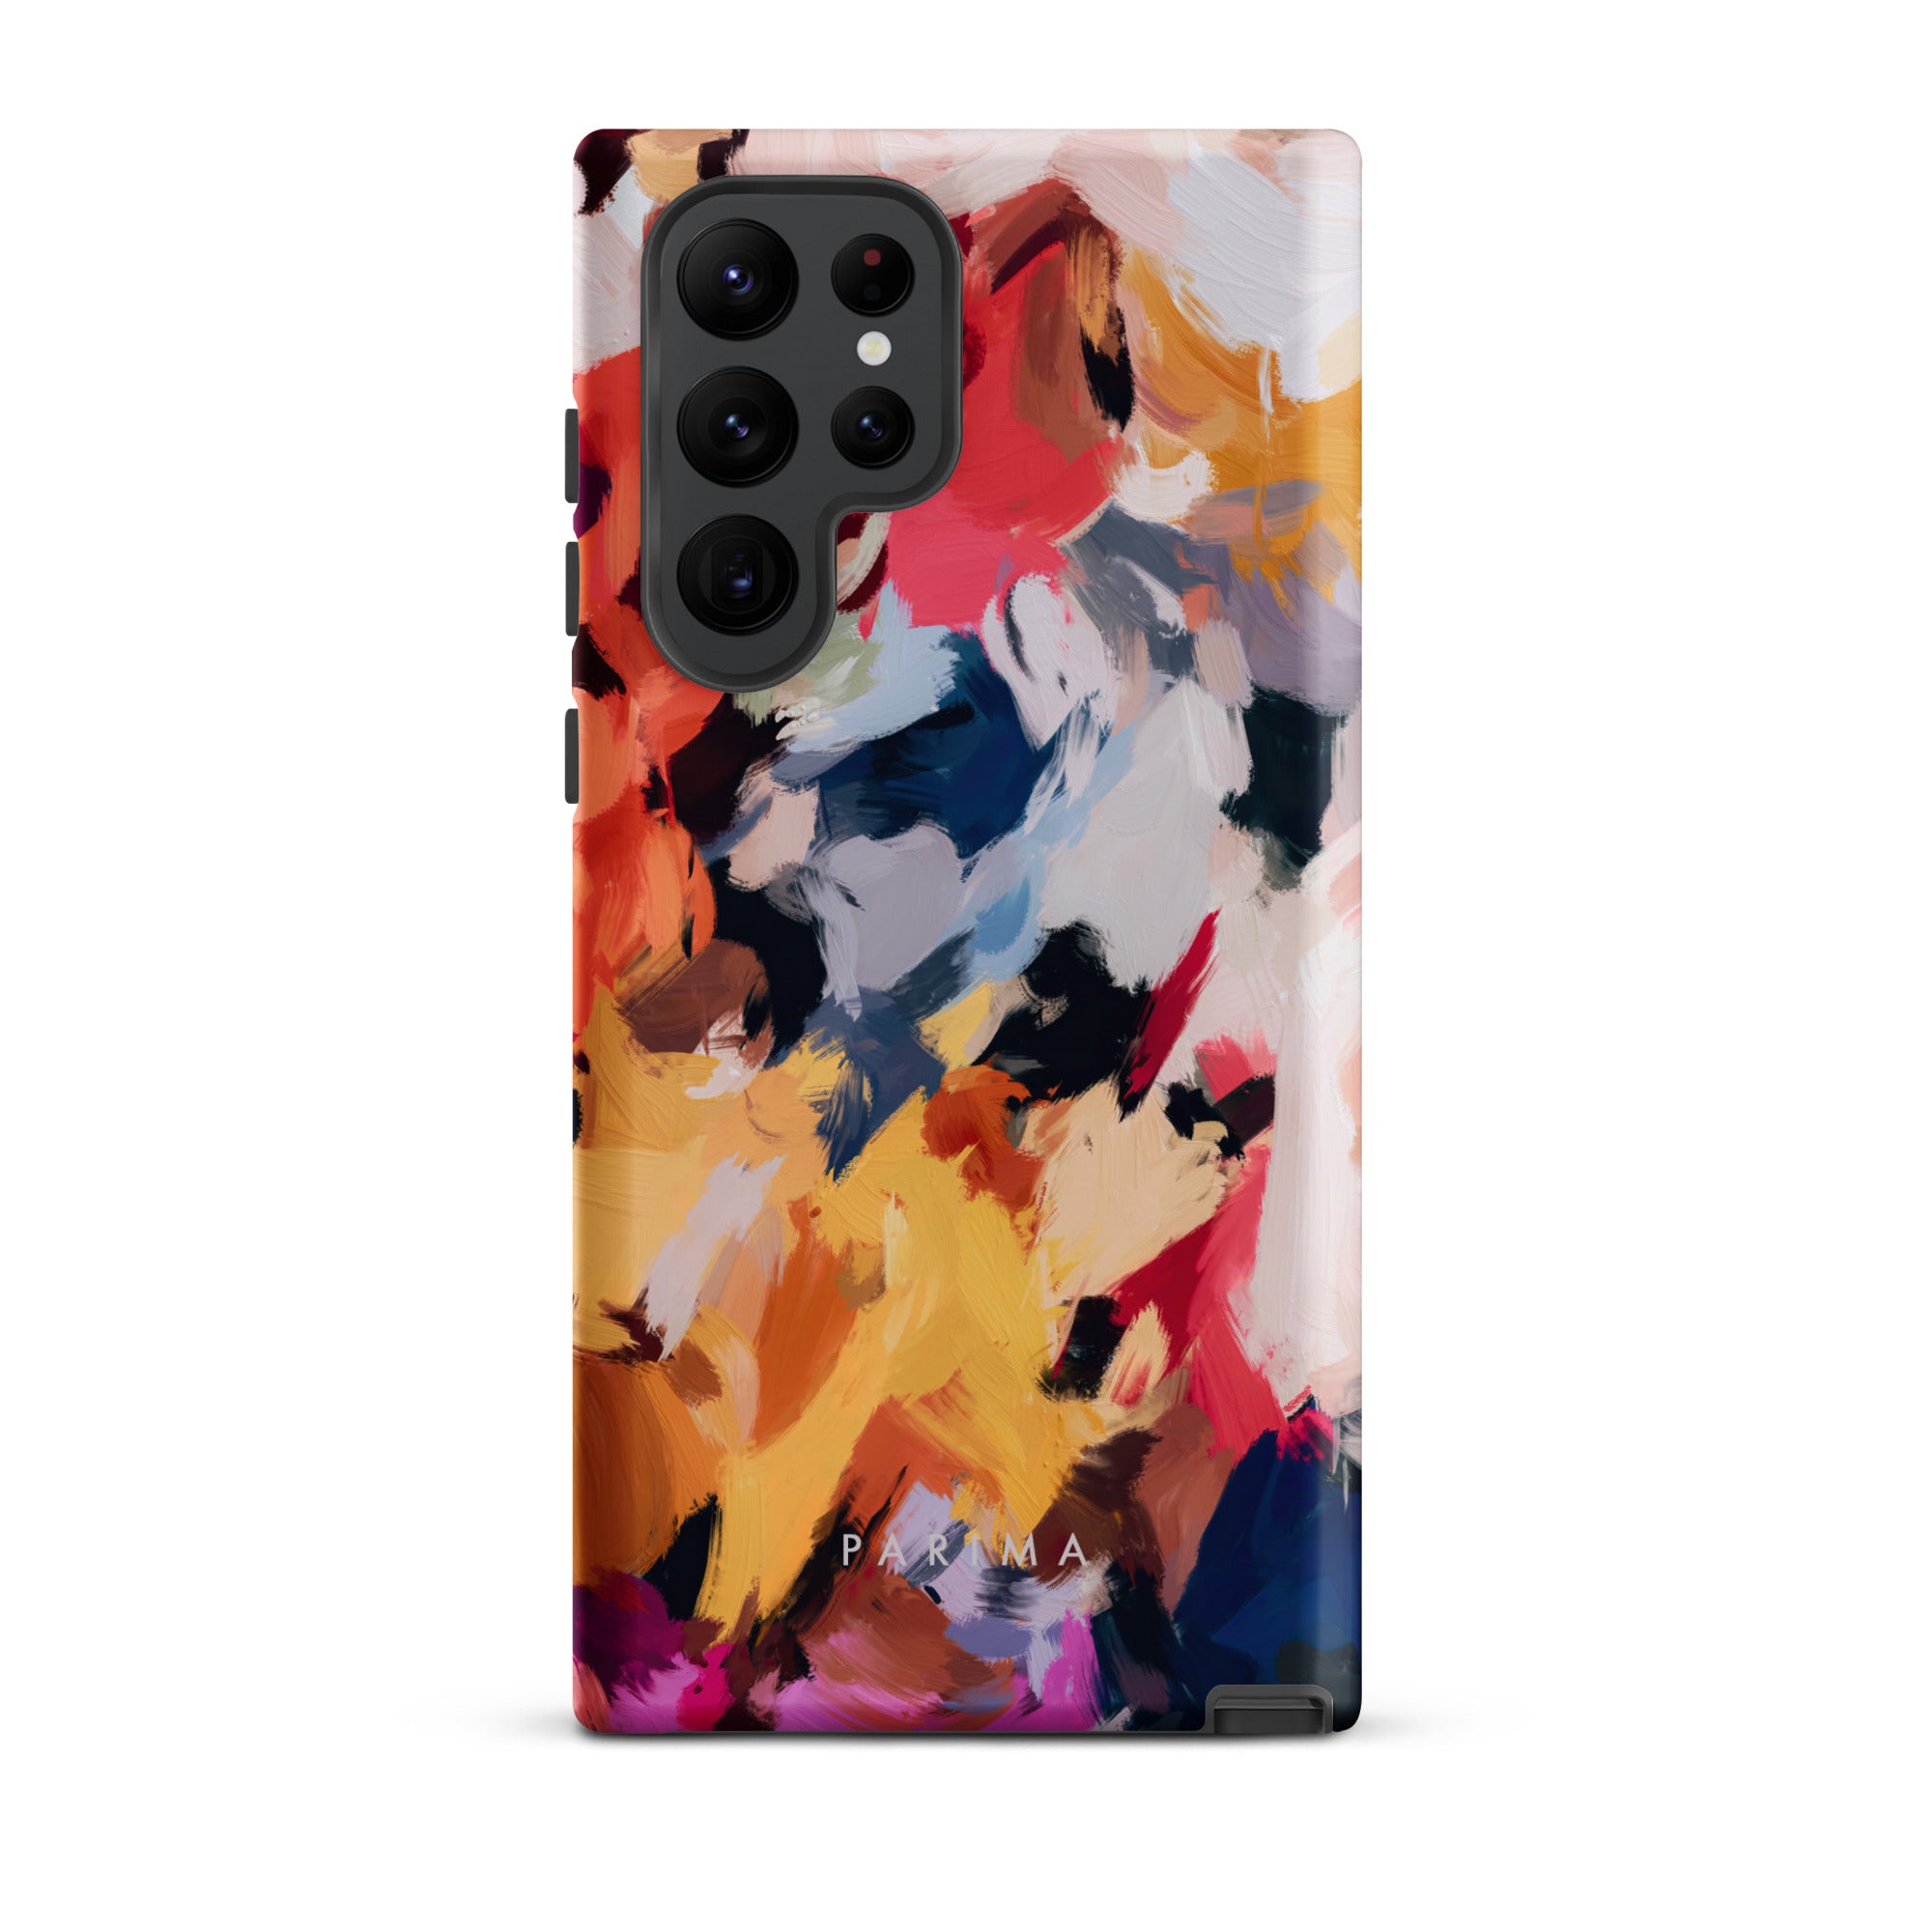 Wilde, blue and yellow multicolor abstract art on Samsung Galaxy S22 Ultra tough case by Parima Studio